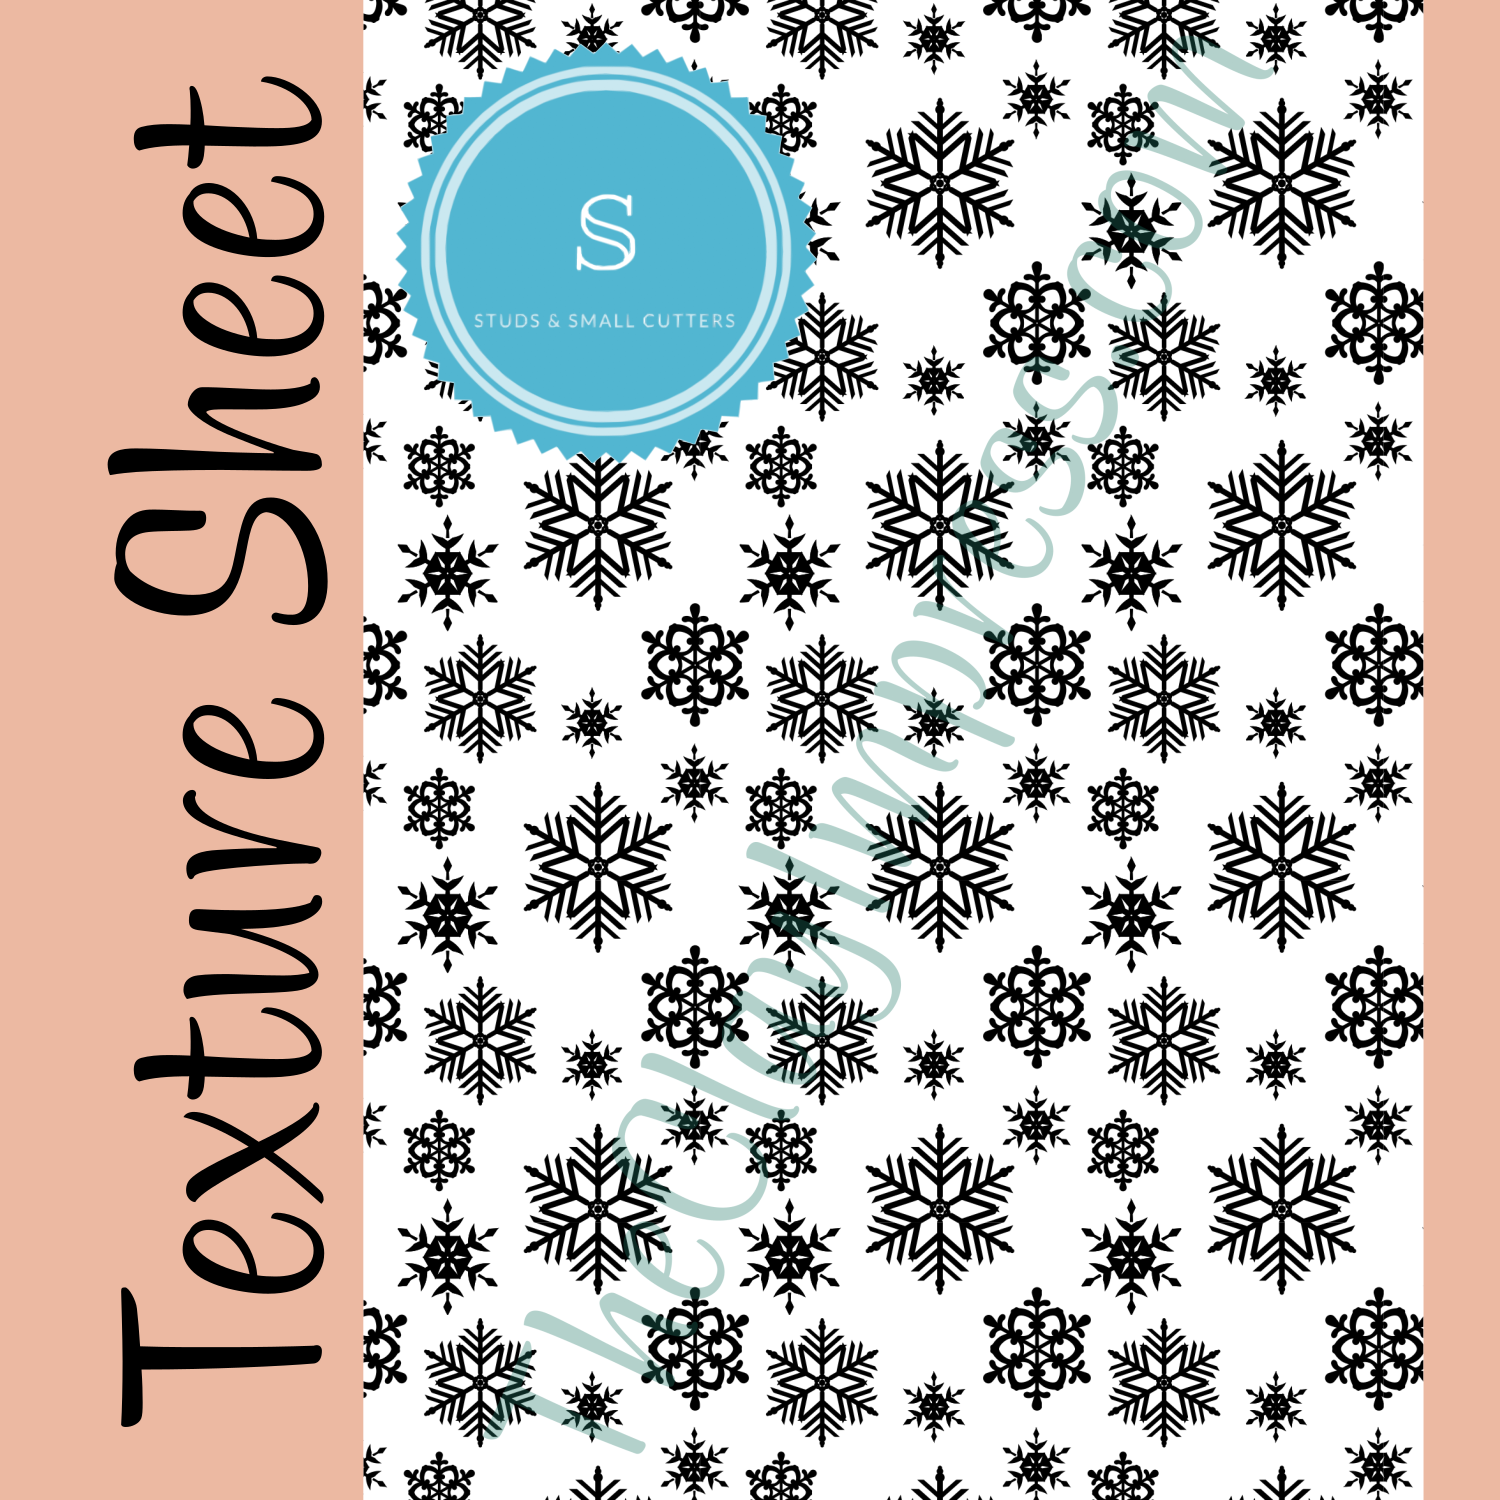 Winter Christmas Snowflake Design Texture for Polymer Clay